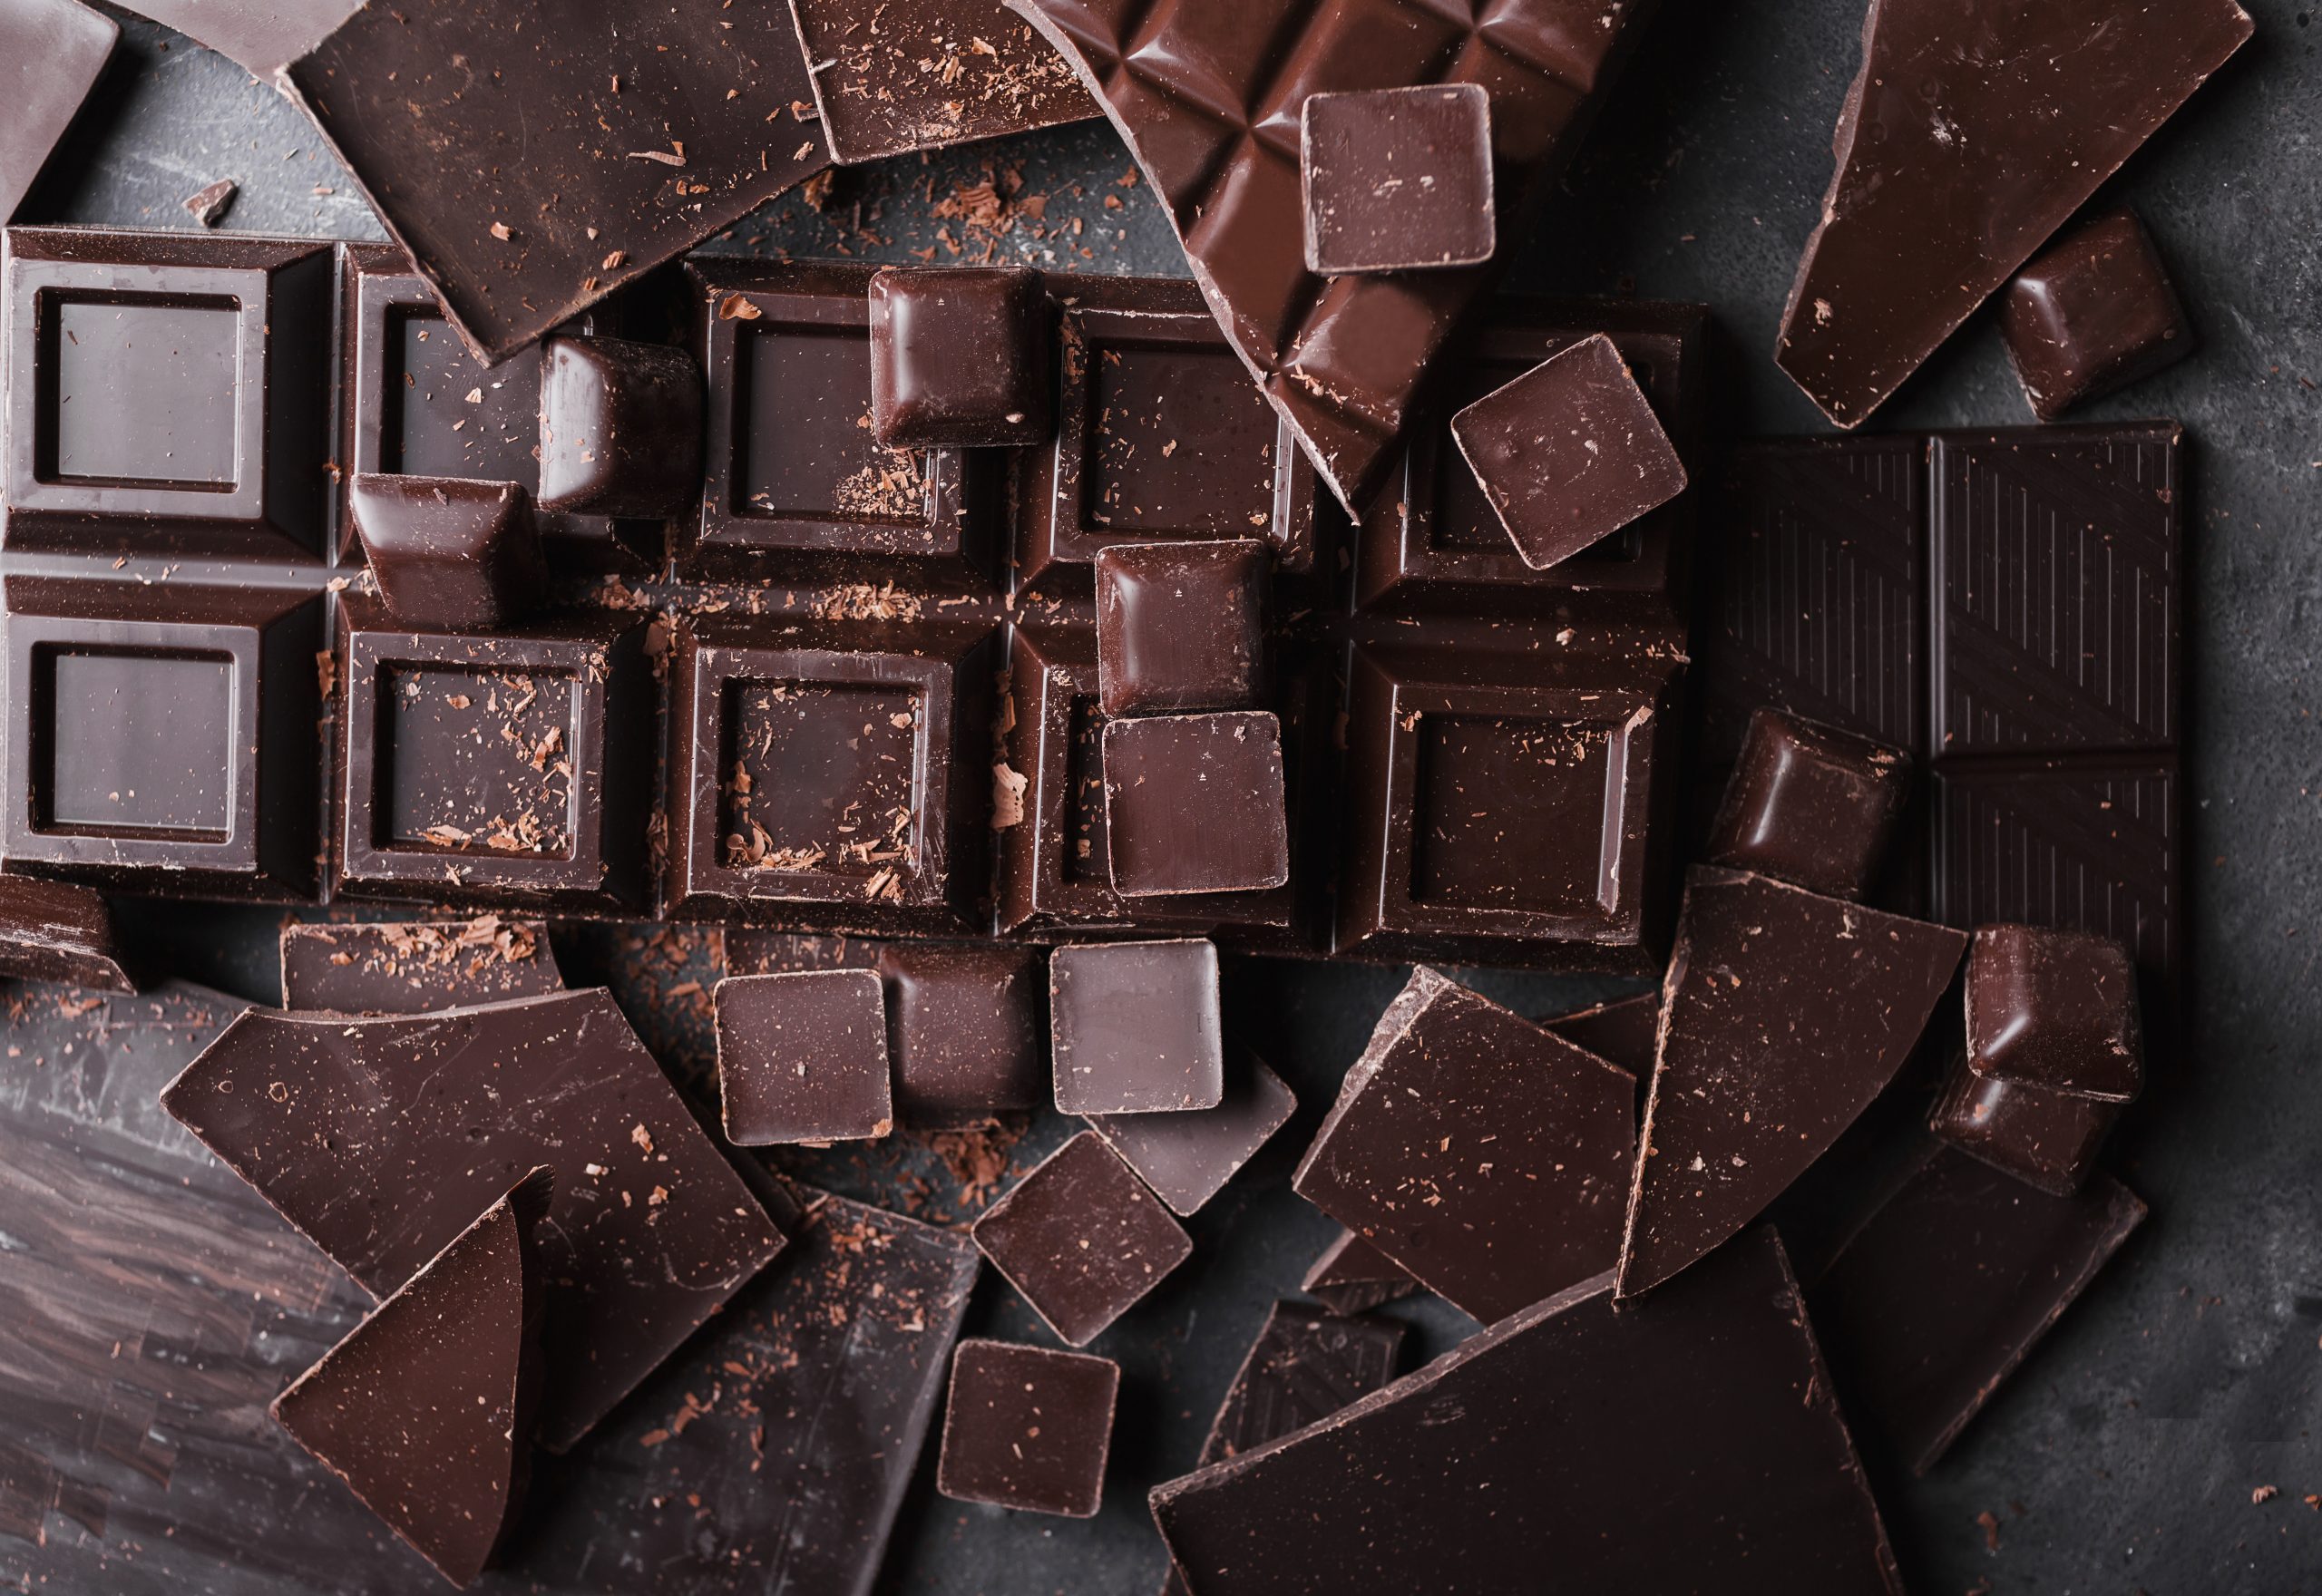 Dark Chocolate: A Delicious and Nutritious Addition to Your Weight Loss Plan